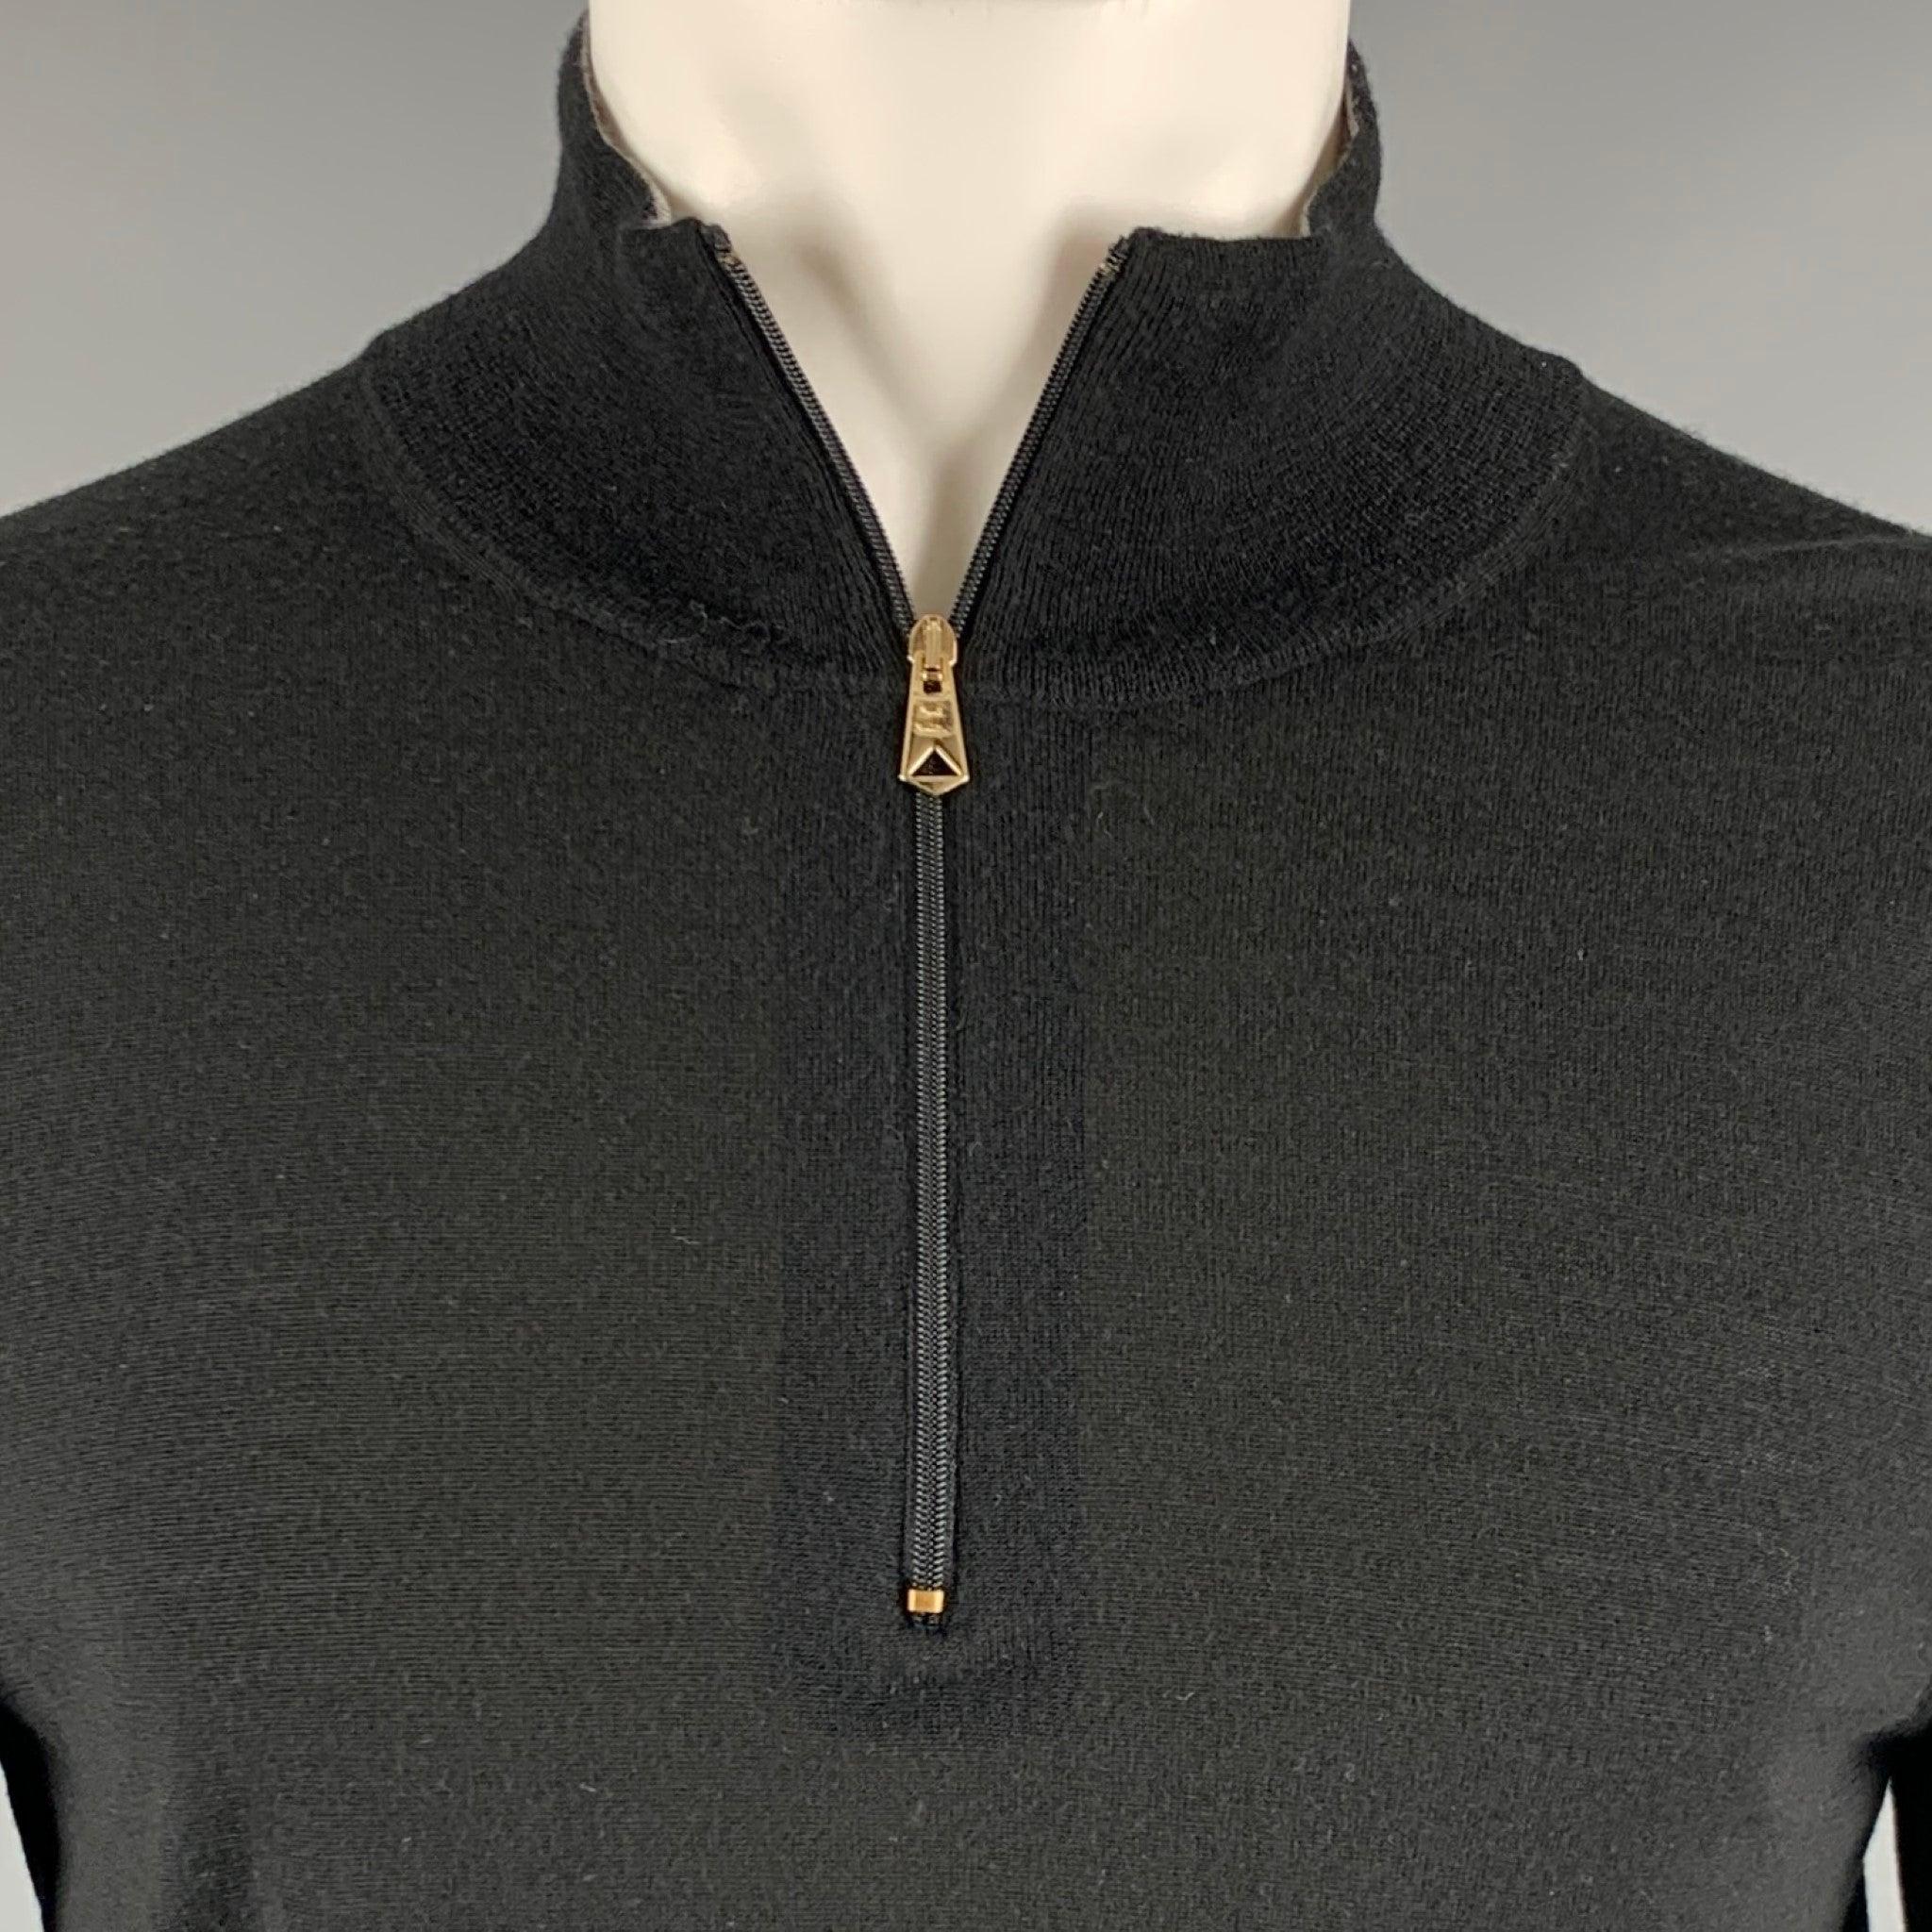 PAUL SMITH pullover
in a black merino wool fabric featuring half placket zip up closure with gold tone hardware.Good Pre-Owned Condition. Moderate signs of wear, please check photos. 

Marked:   S 

Measurements: 
 
Shoulder: 16.5 inches Chest: 39